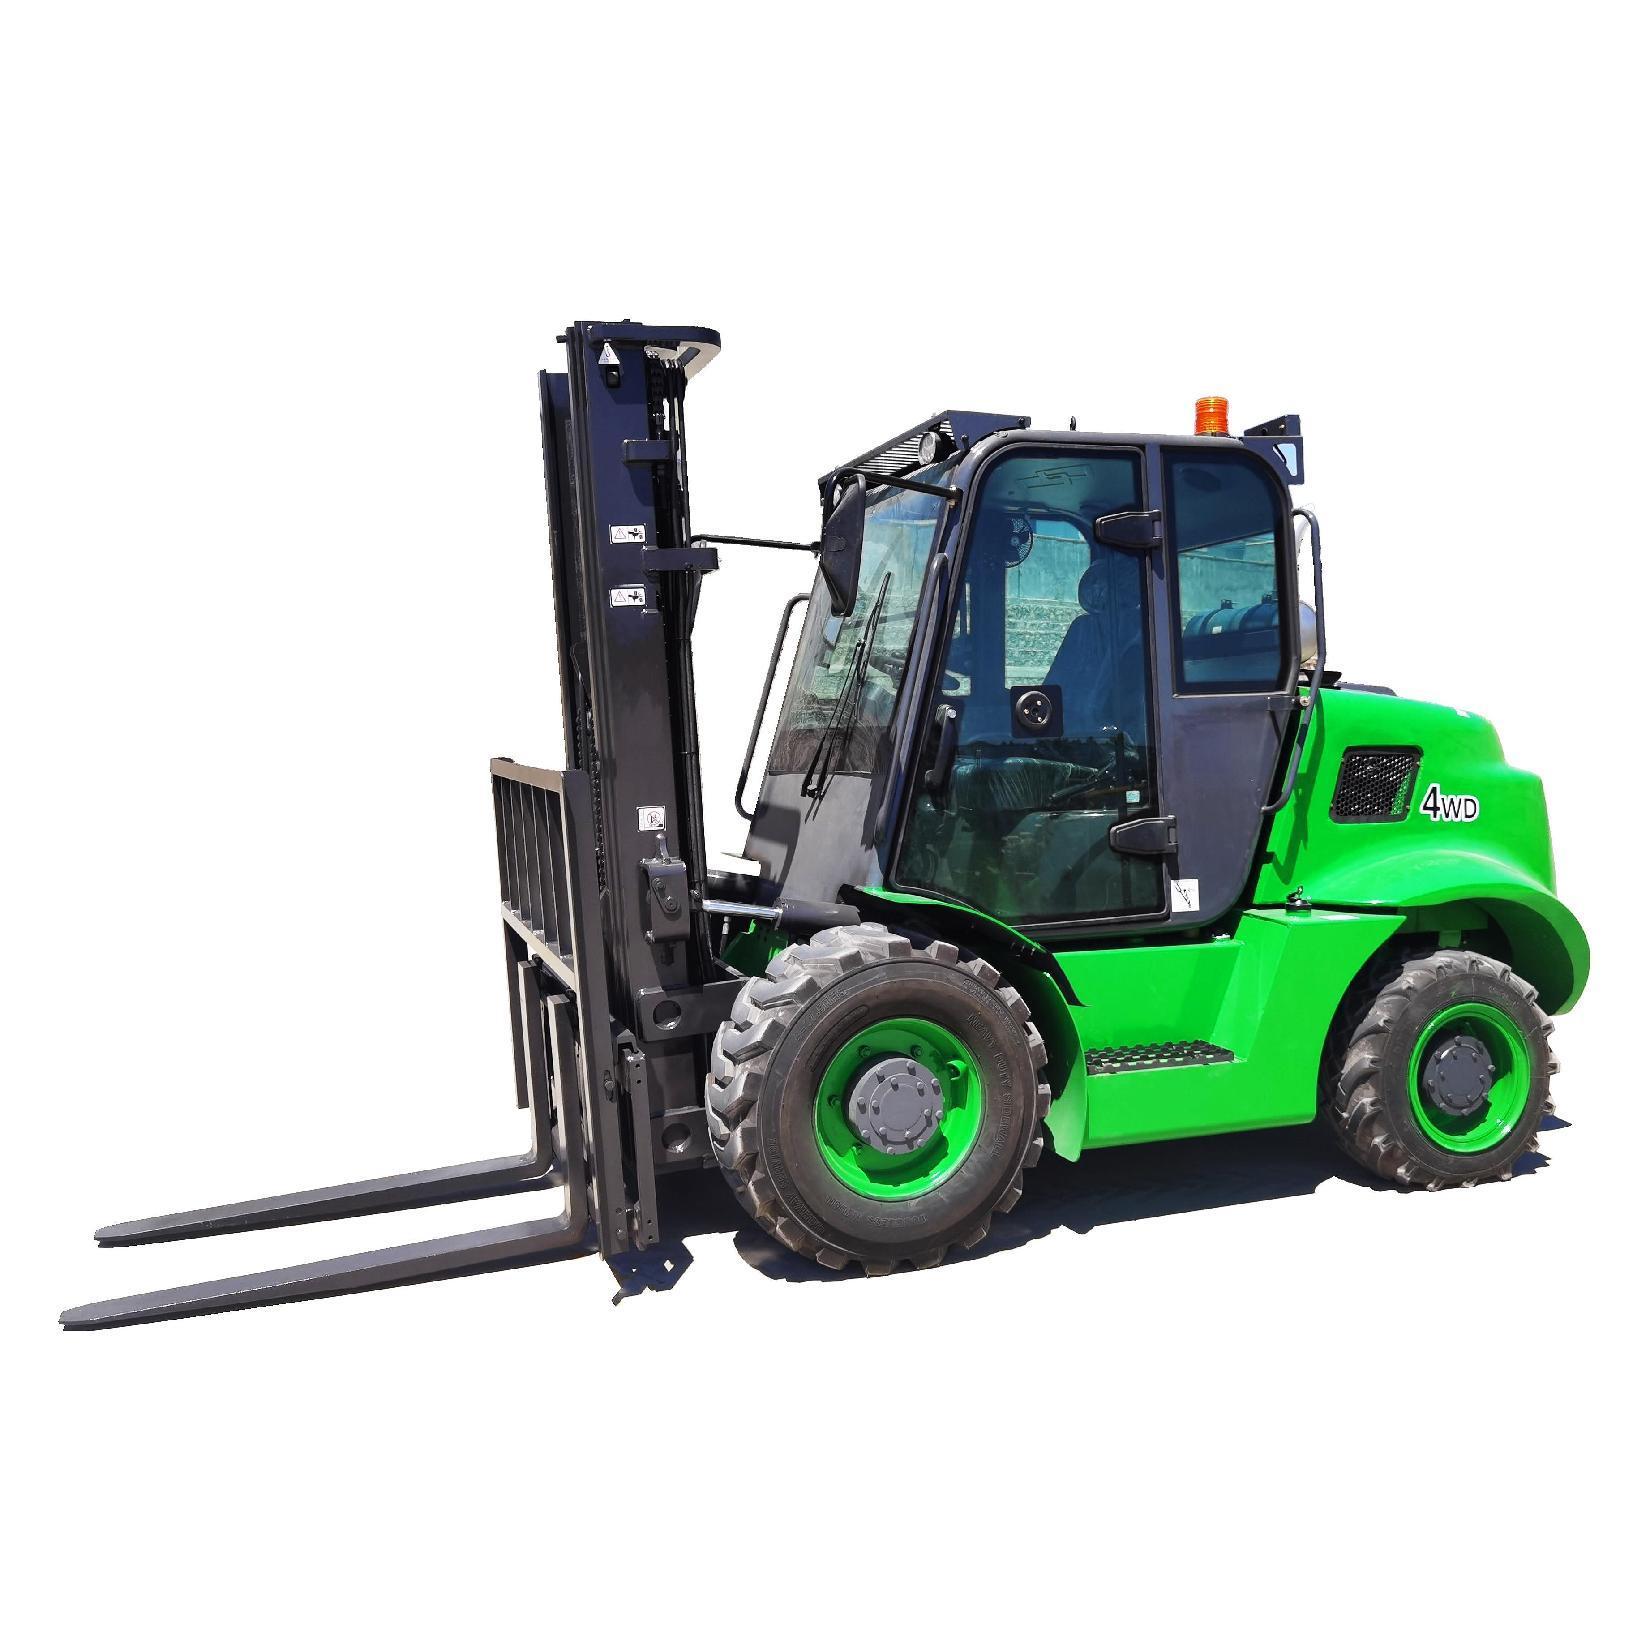 4WD Rough Terrain Diesel Forklift Advantages And Operating Guide